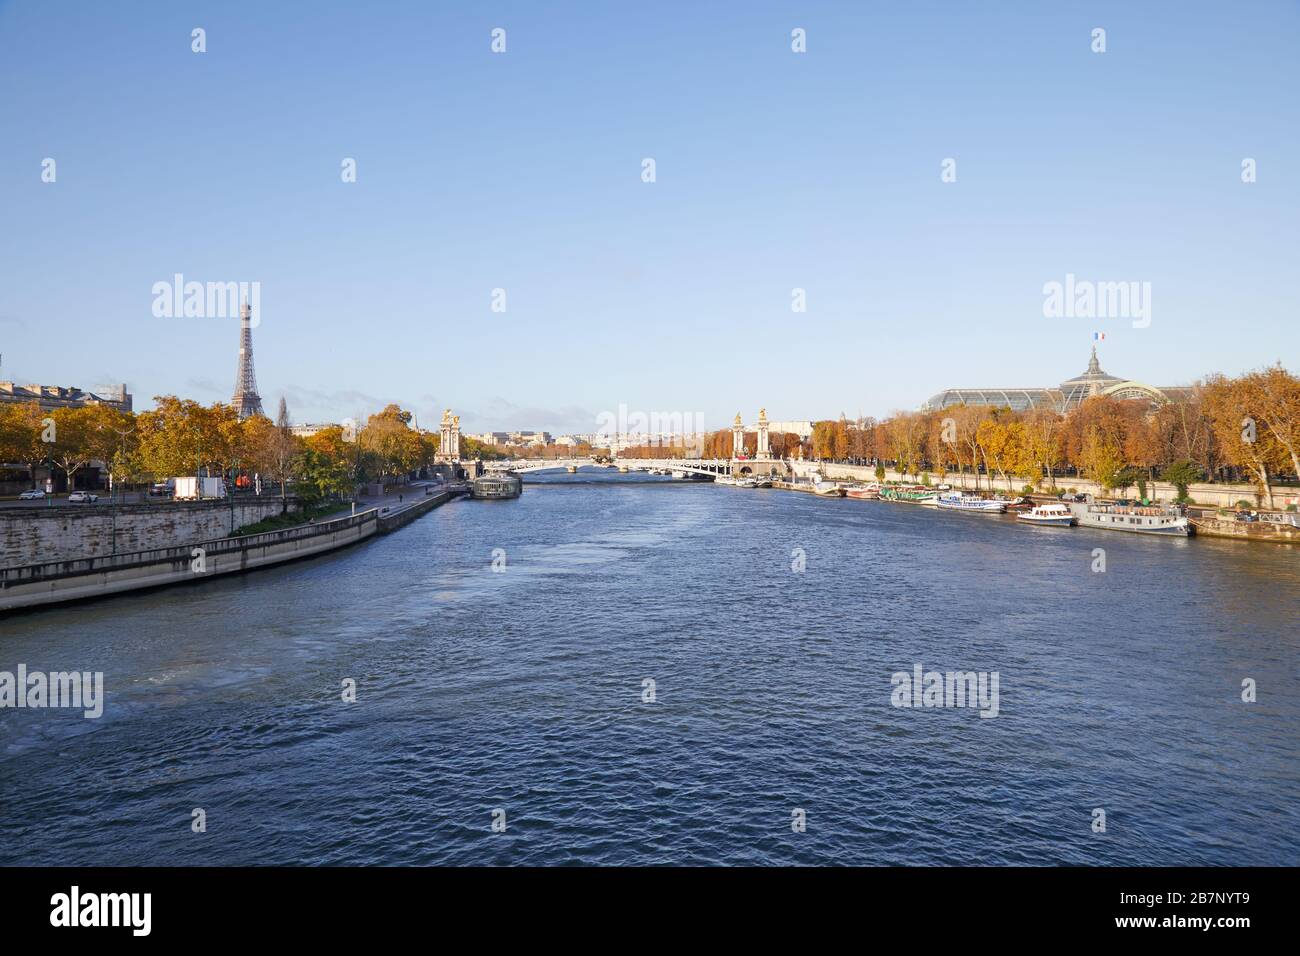 Seine river view with Eiffel tower and Alexander III bridge wide angle view in a sunny autumn day in Paris Stock Photo